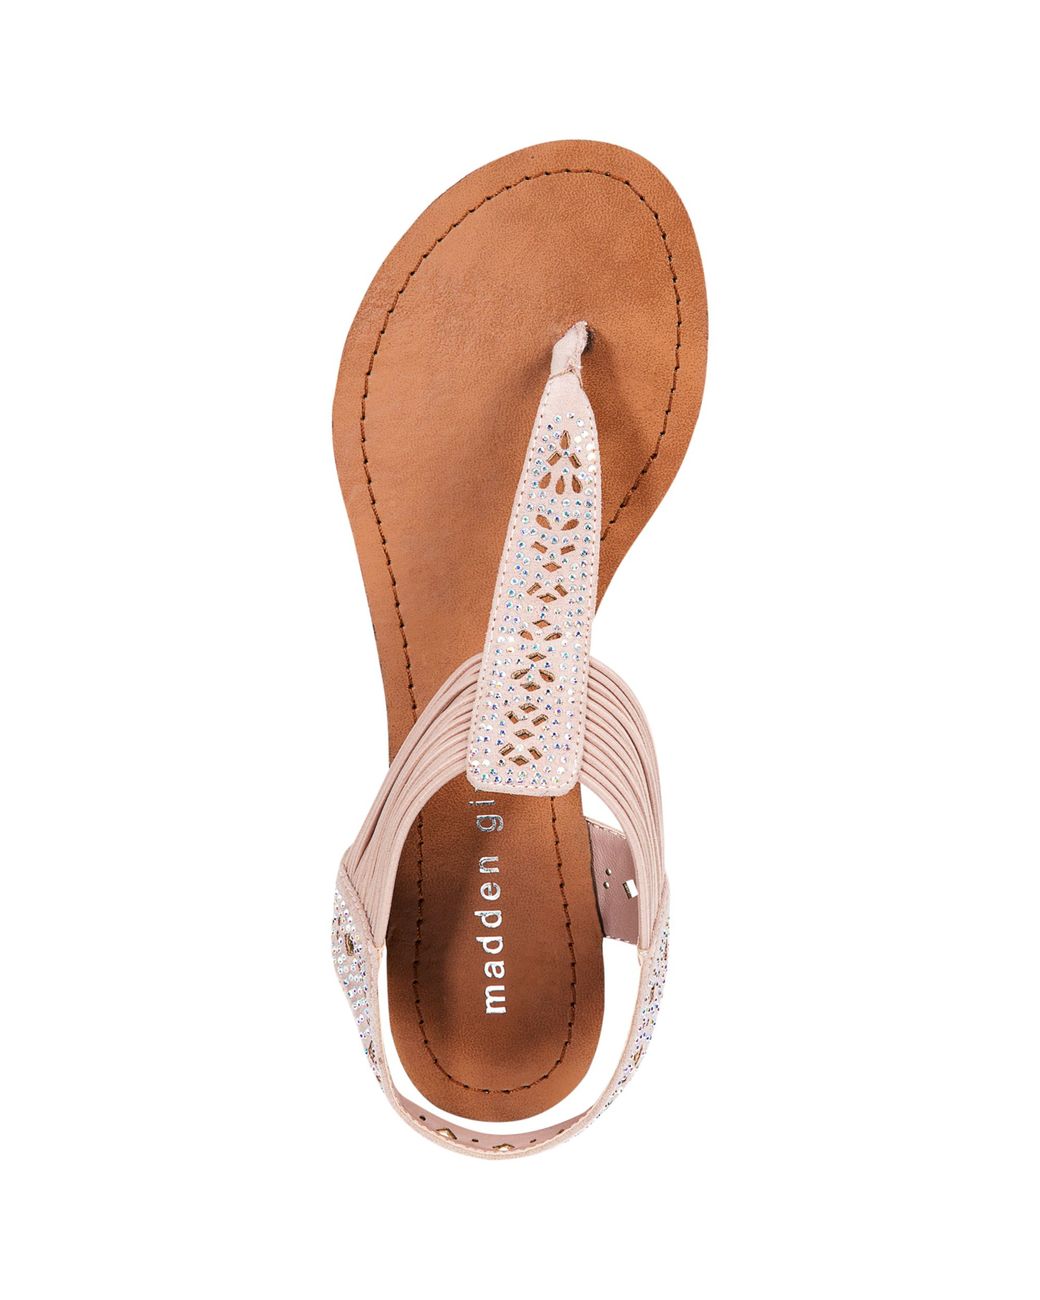 Aggregate more than 143 madden girl rose gold sandals